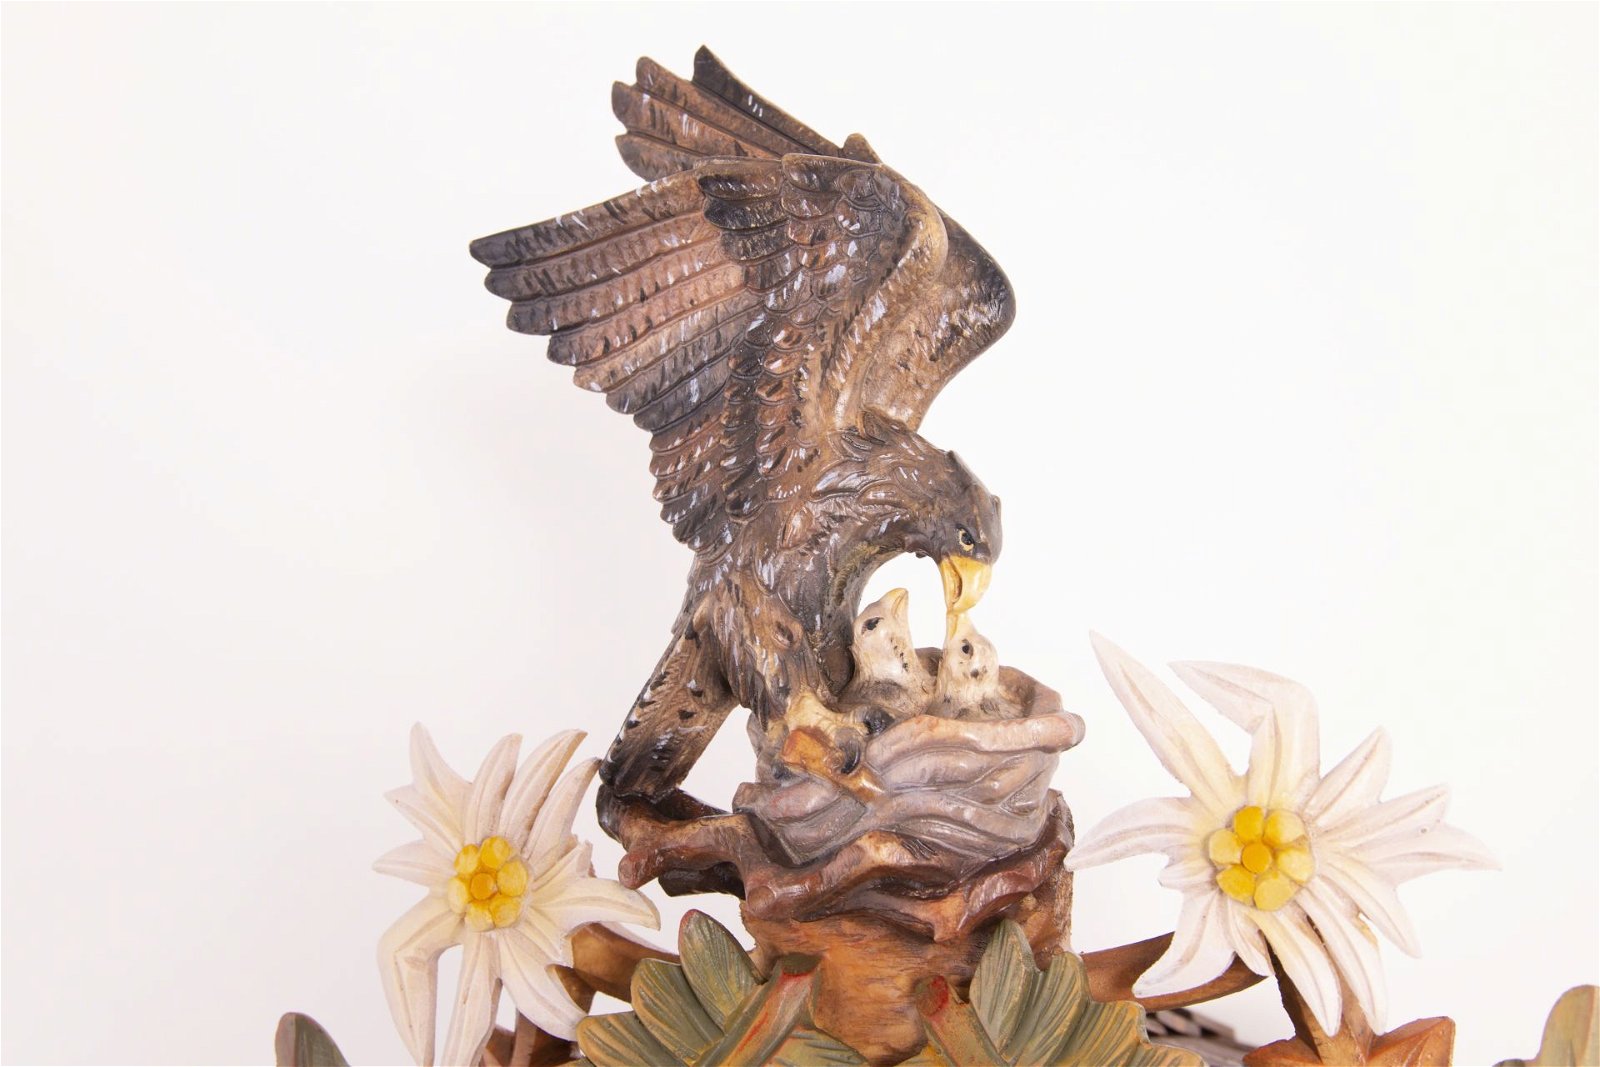 Cuckoo Clock Carved Style 8 Day Movement 54cm by Hönes